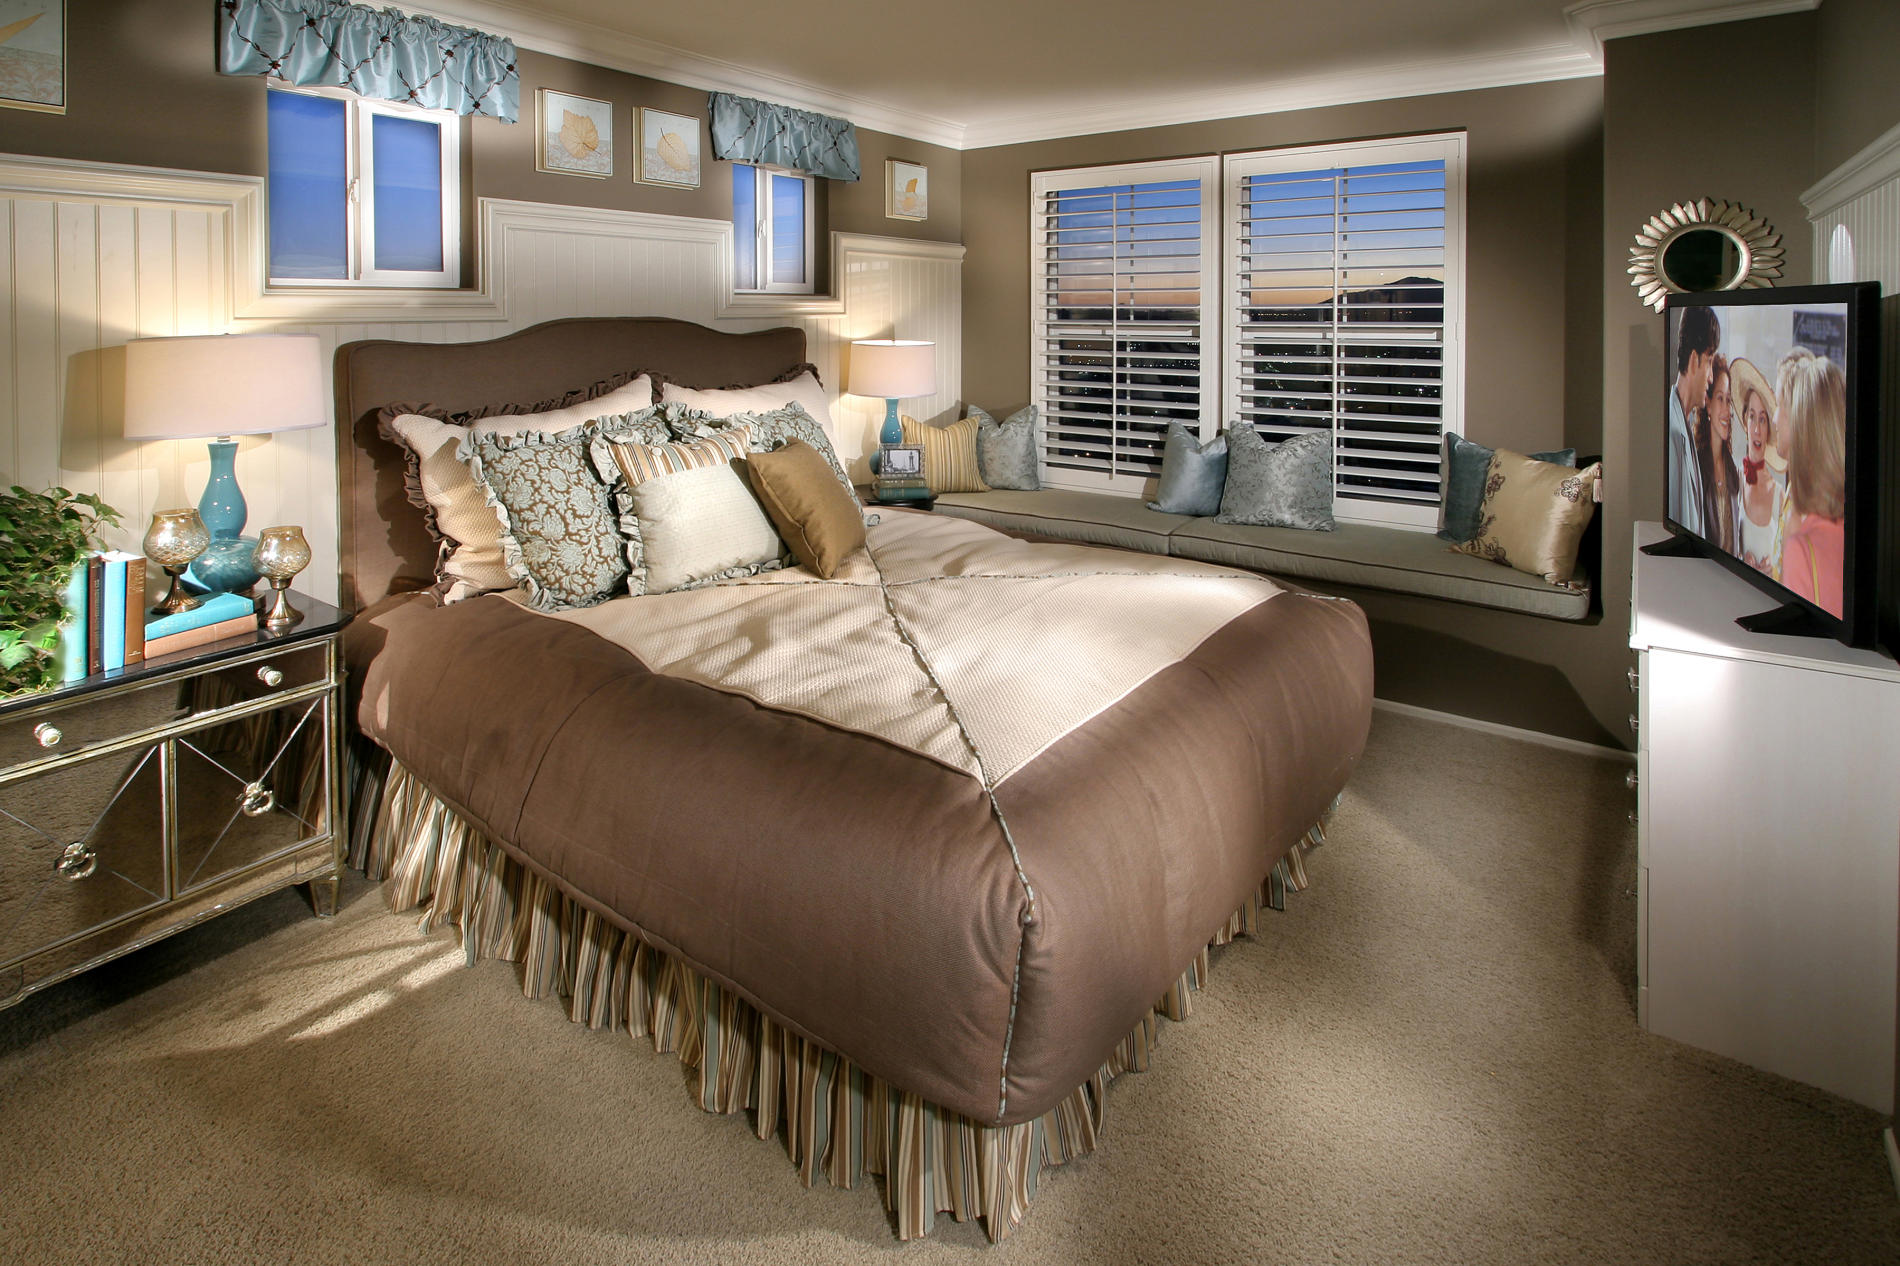 Window Used Calm Casual Window Used Blinds And Calm Wall Paint Inside Small Master Bedroom Ideas With Double Bed Plus Soft Pillows And Warm Blanket Bedroom Small Master Bedroom Ideas For The Better Bedroom Condition